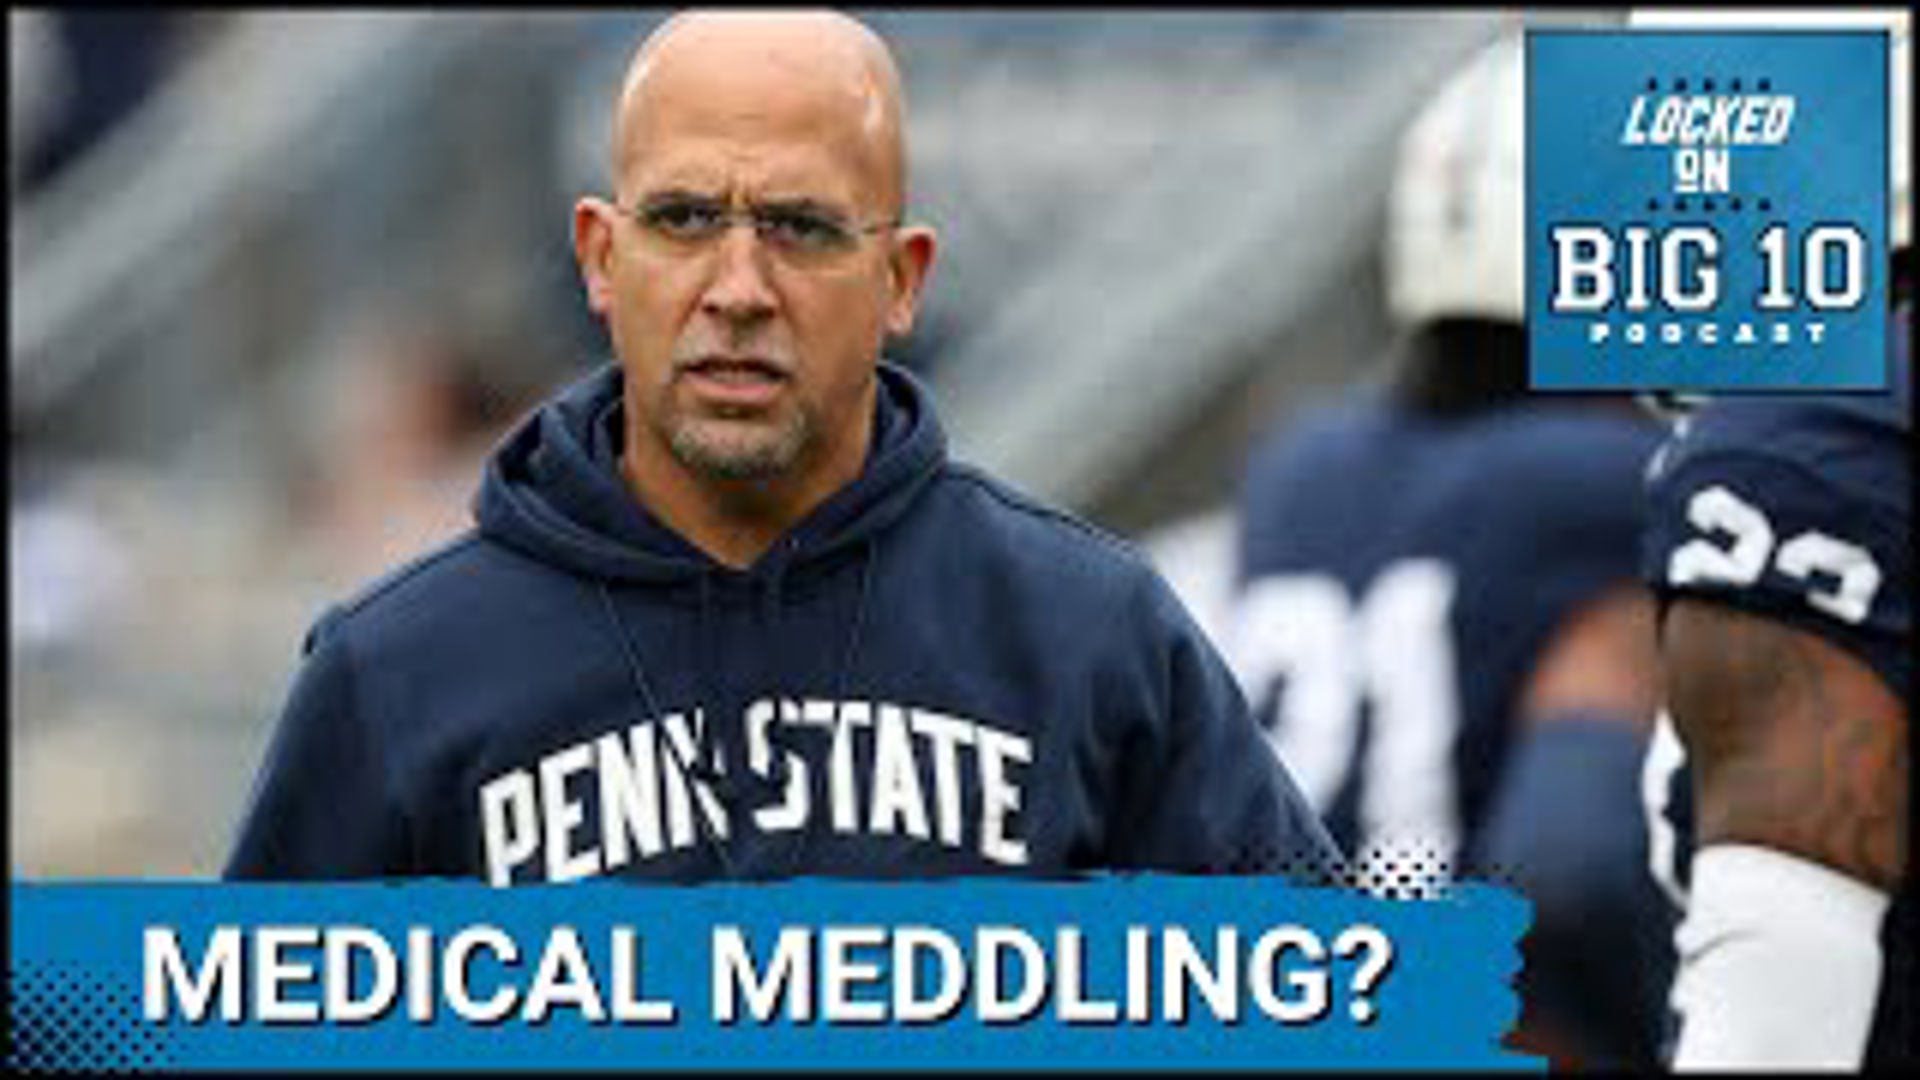 Penn State Coach James Franklin Accused of Medical Meddling | wfaa.com